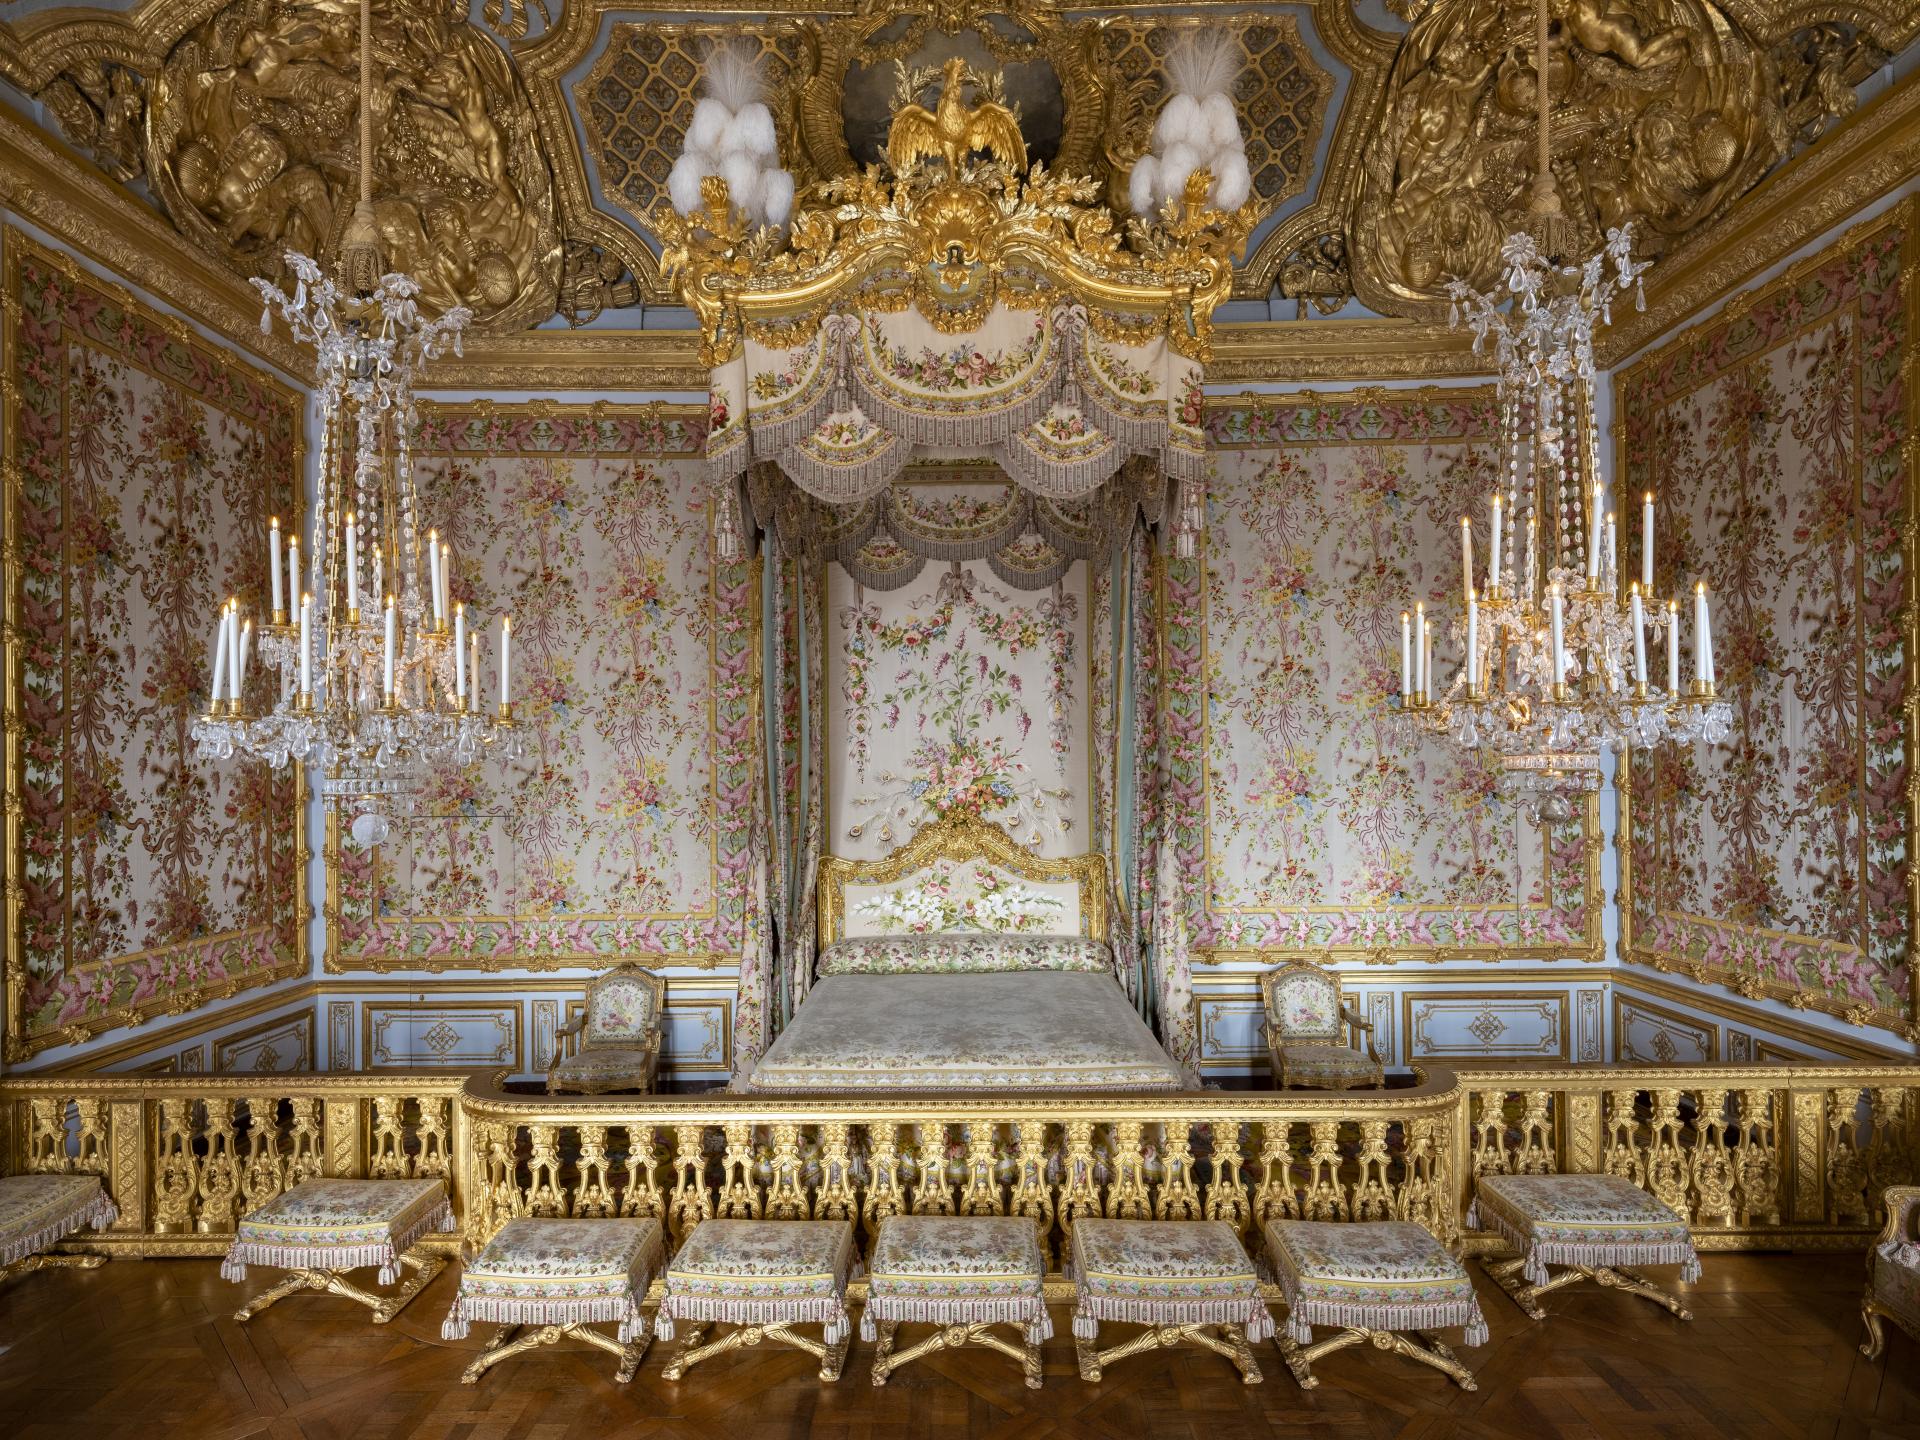 example of the ornate interiors of the Palace of Versailles